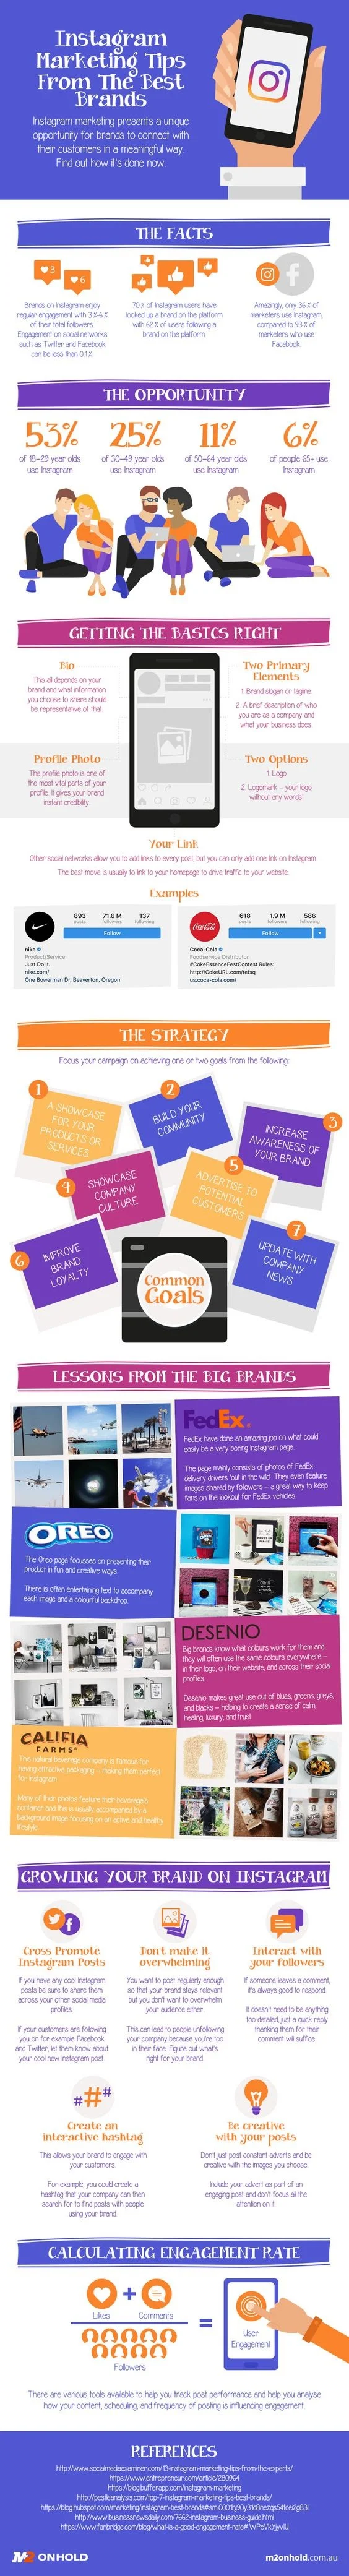 Instagram Marketing Tips from the Best Brands #Infographic